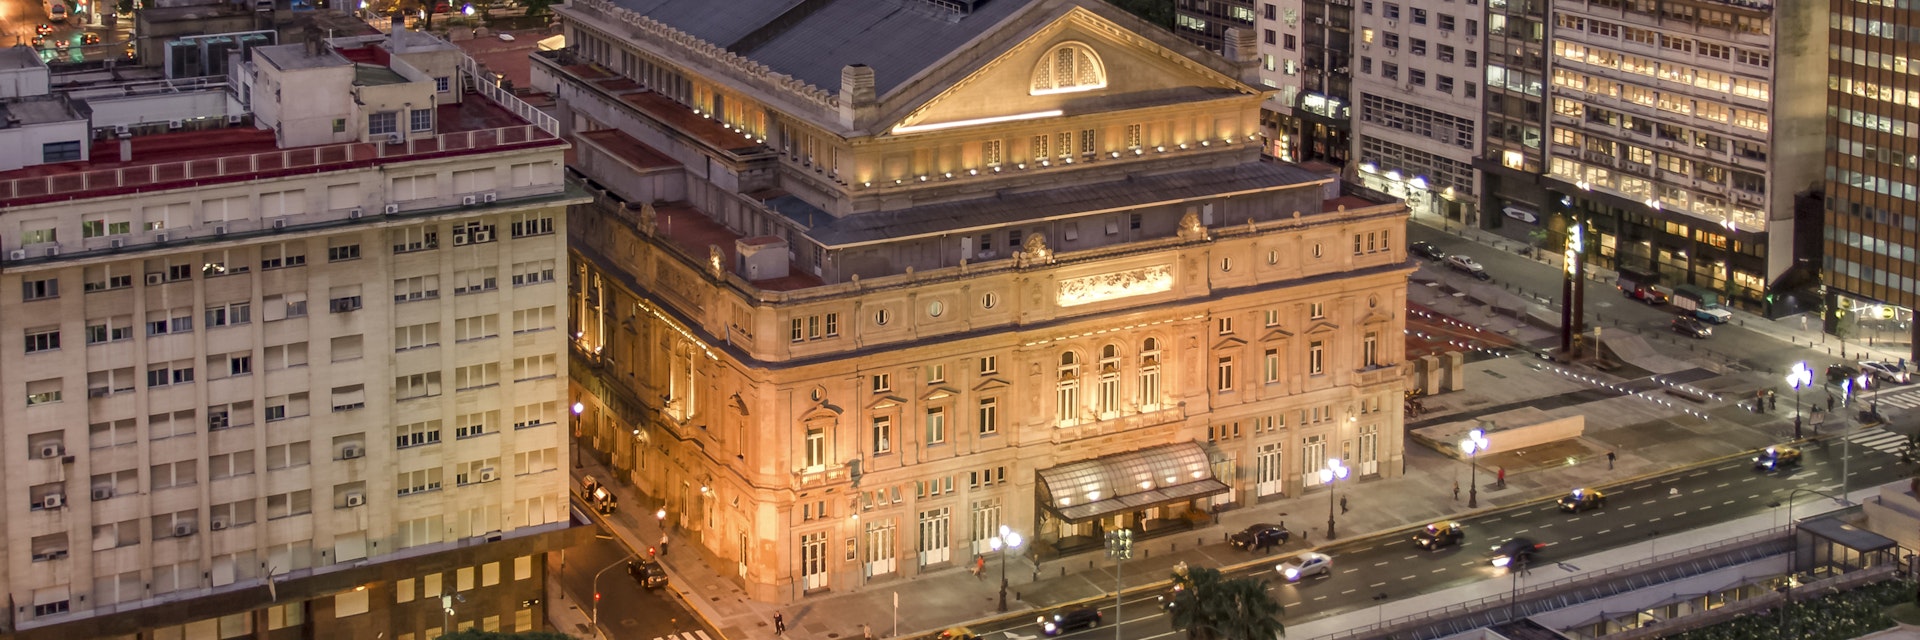 High angle view of "Teatro Col?n" (Spanish for Columbus Theatre) at twilight.Buenos Aires, Argentina